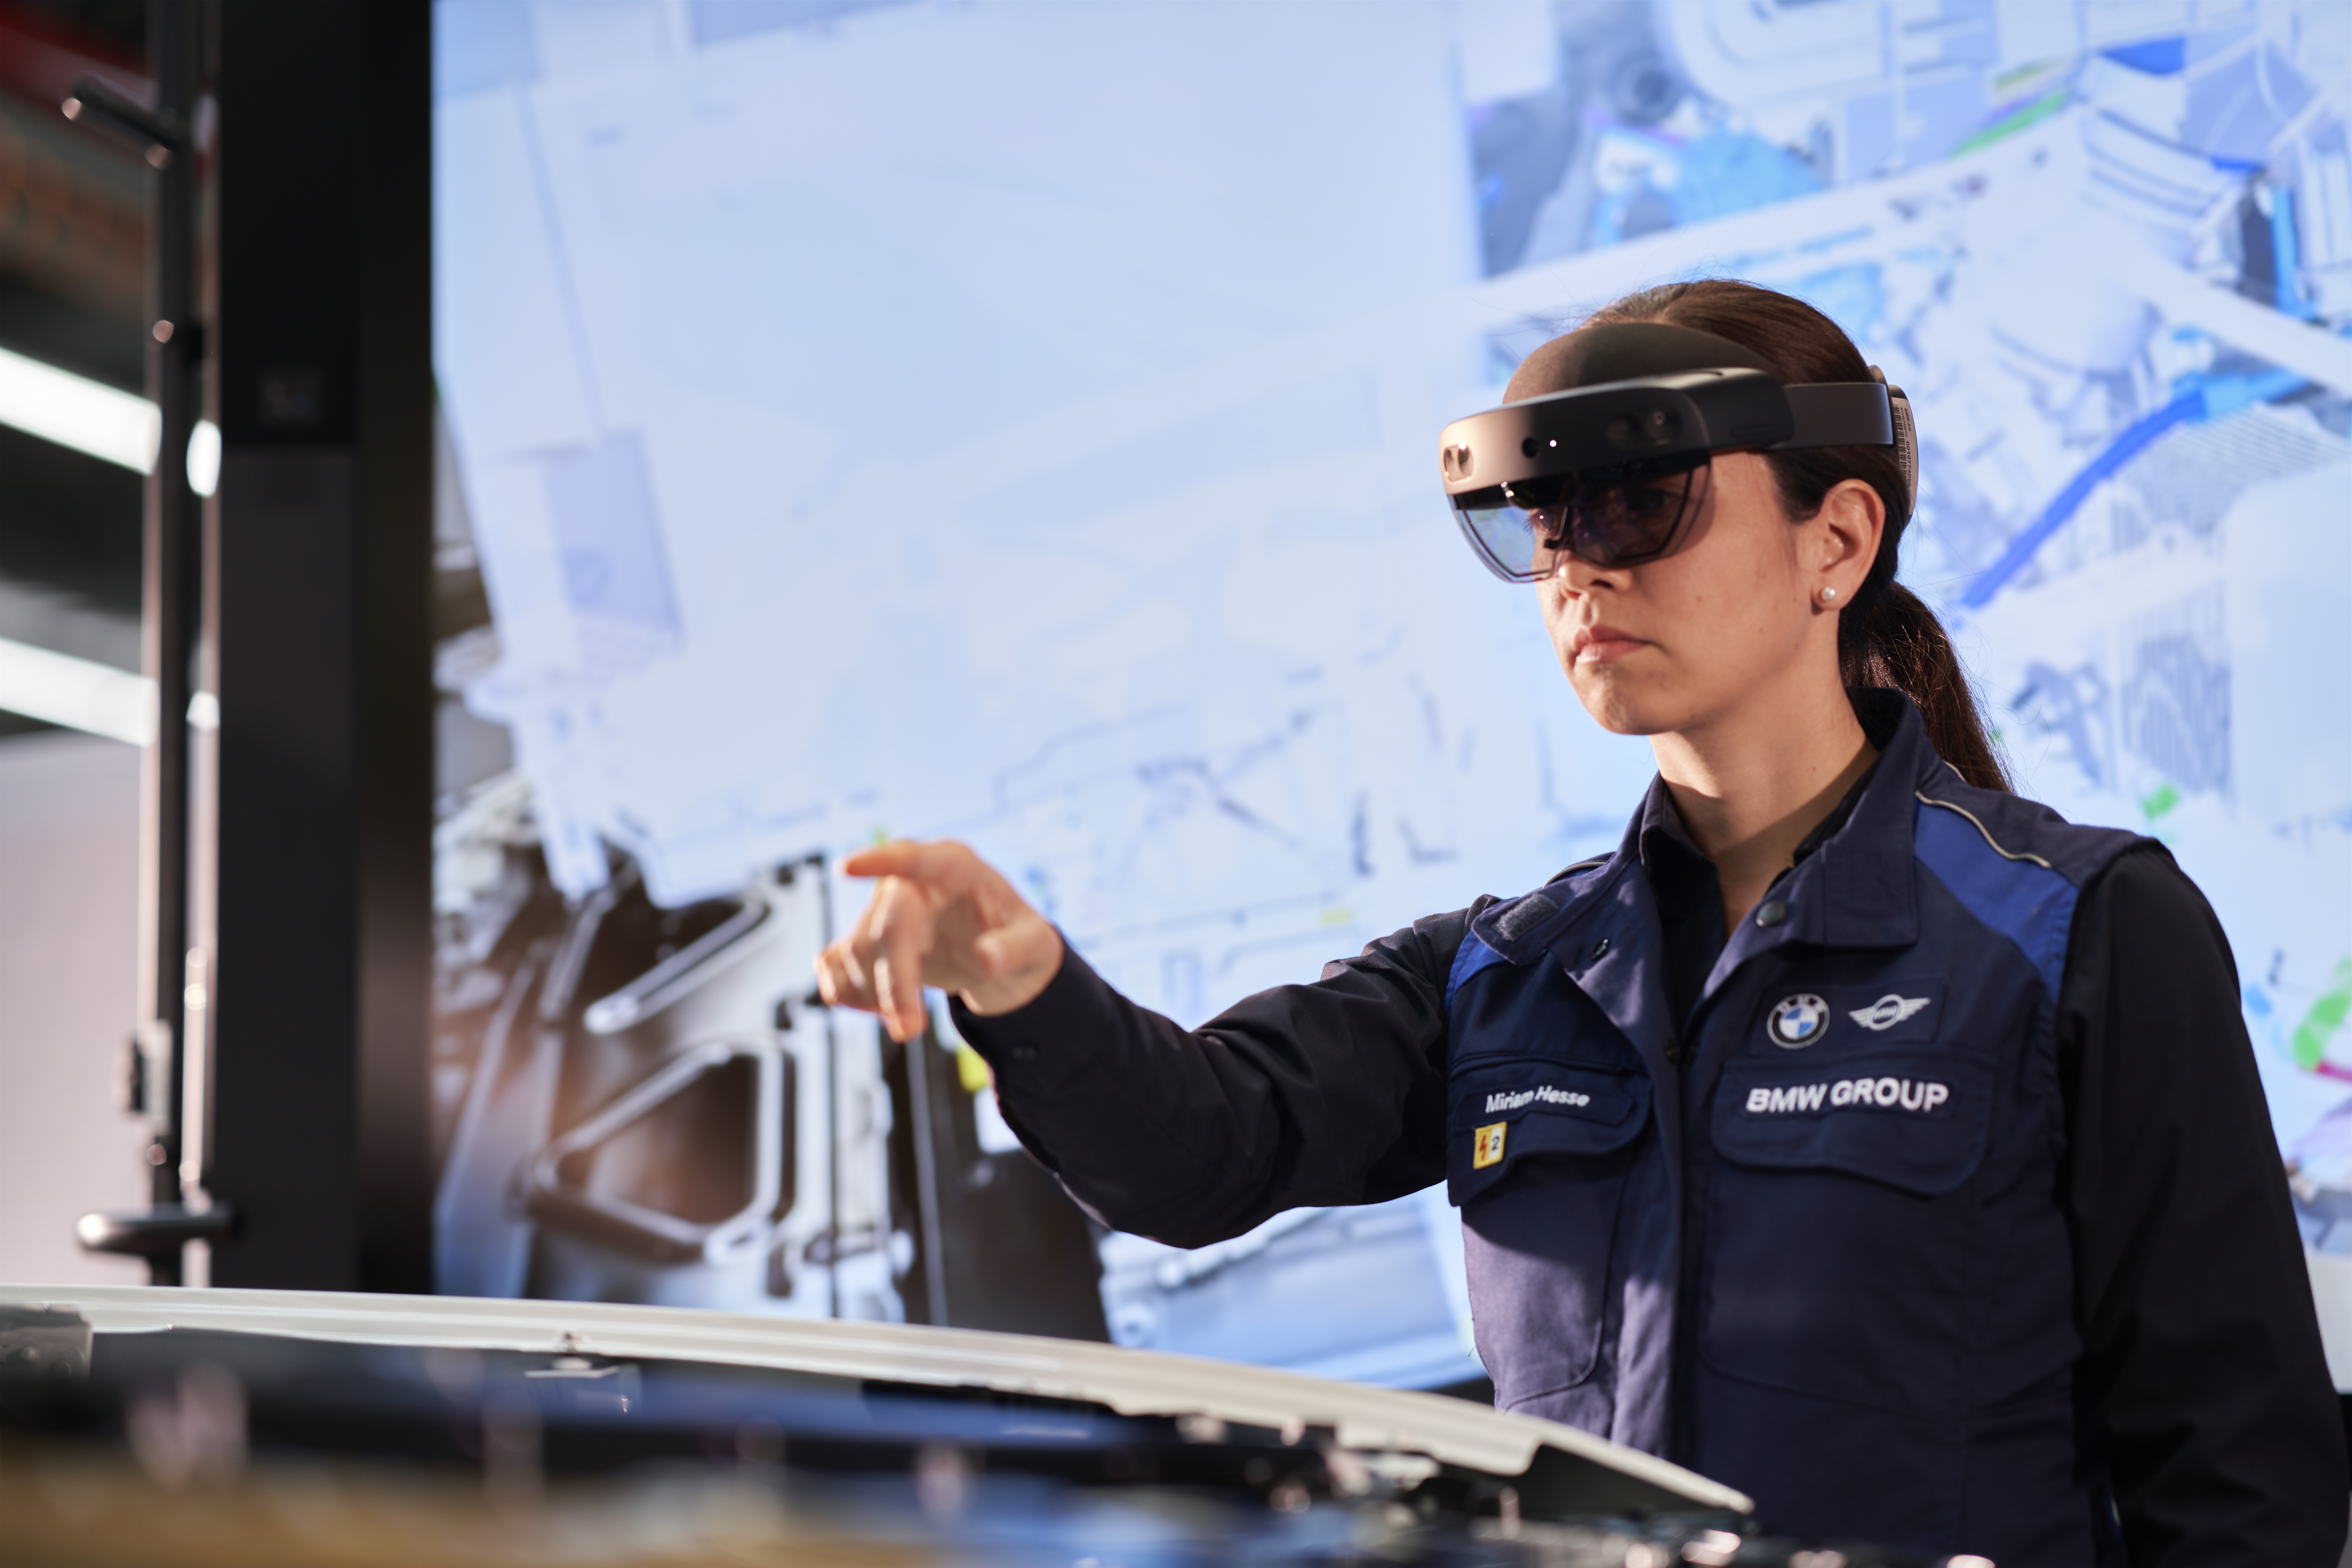 BMW Group implements augmented reality in prototyping